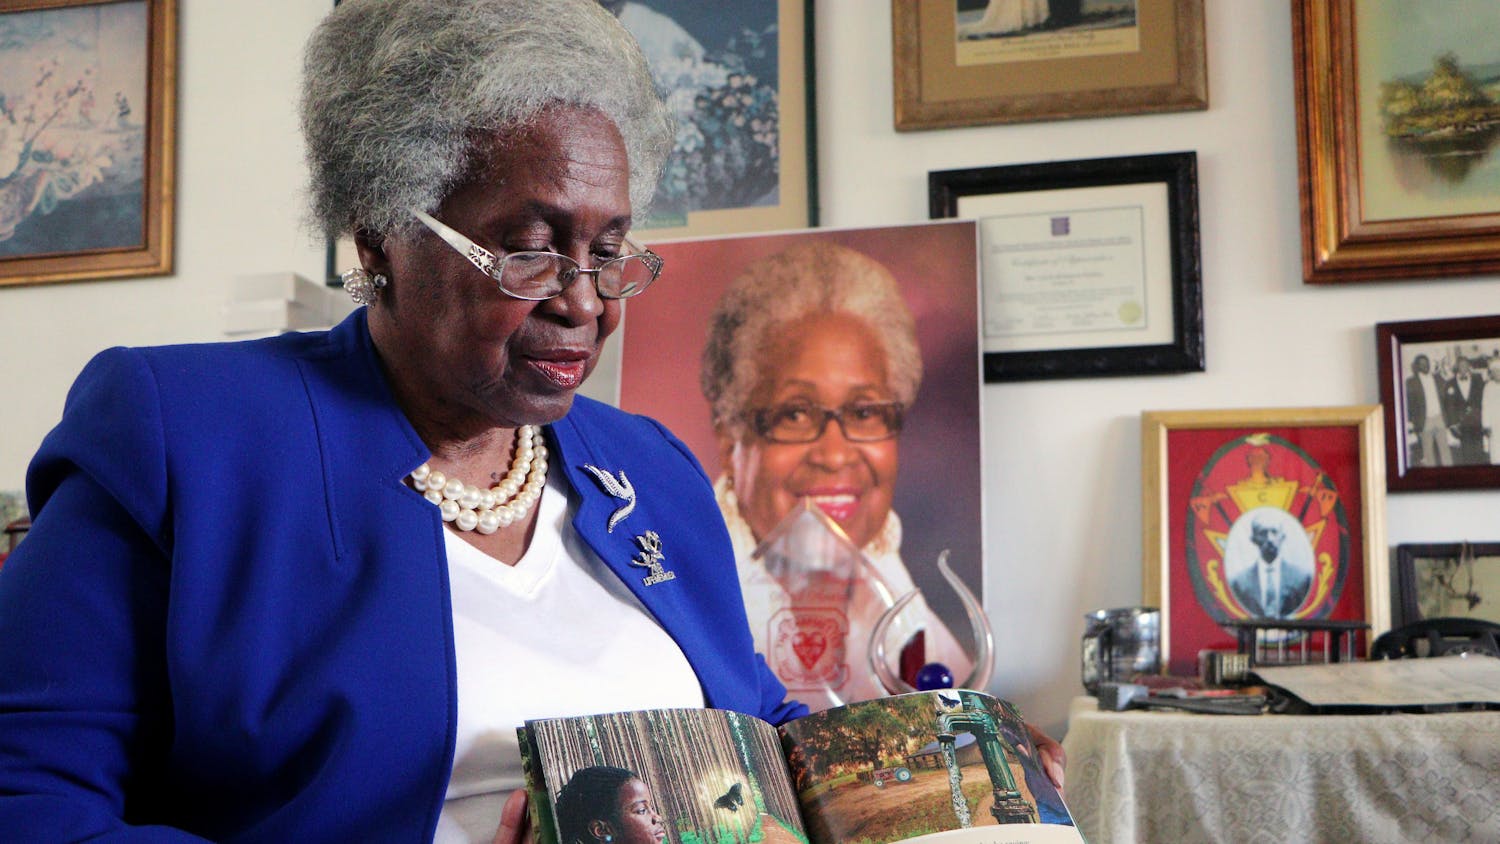 Lizzie Jenkins, the 84-year-old founder and president of the Real Rosewood Foundation, Inc., is passing on the opportunity for representation to a new generation with her upcoming children’s book titled “Lizzie’s Rosewood Race.” The book’s publication is scheduled for early 2023 to align with the centennial of the Rosewood massacre.&nbsp;